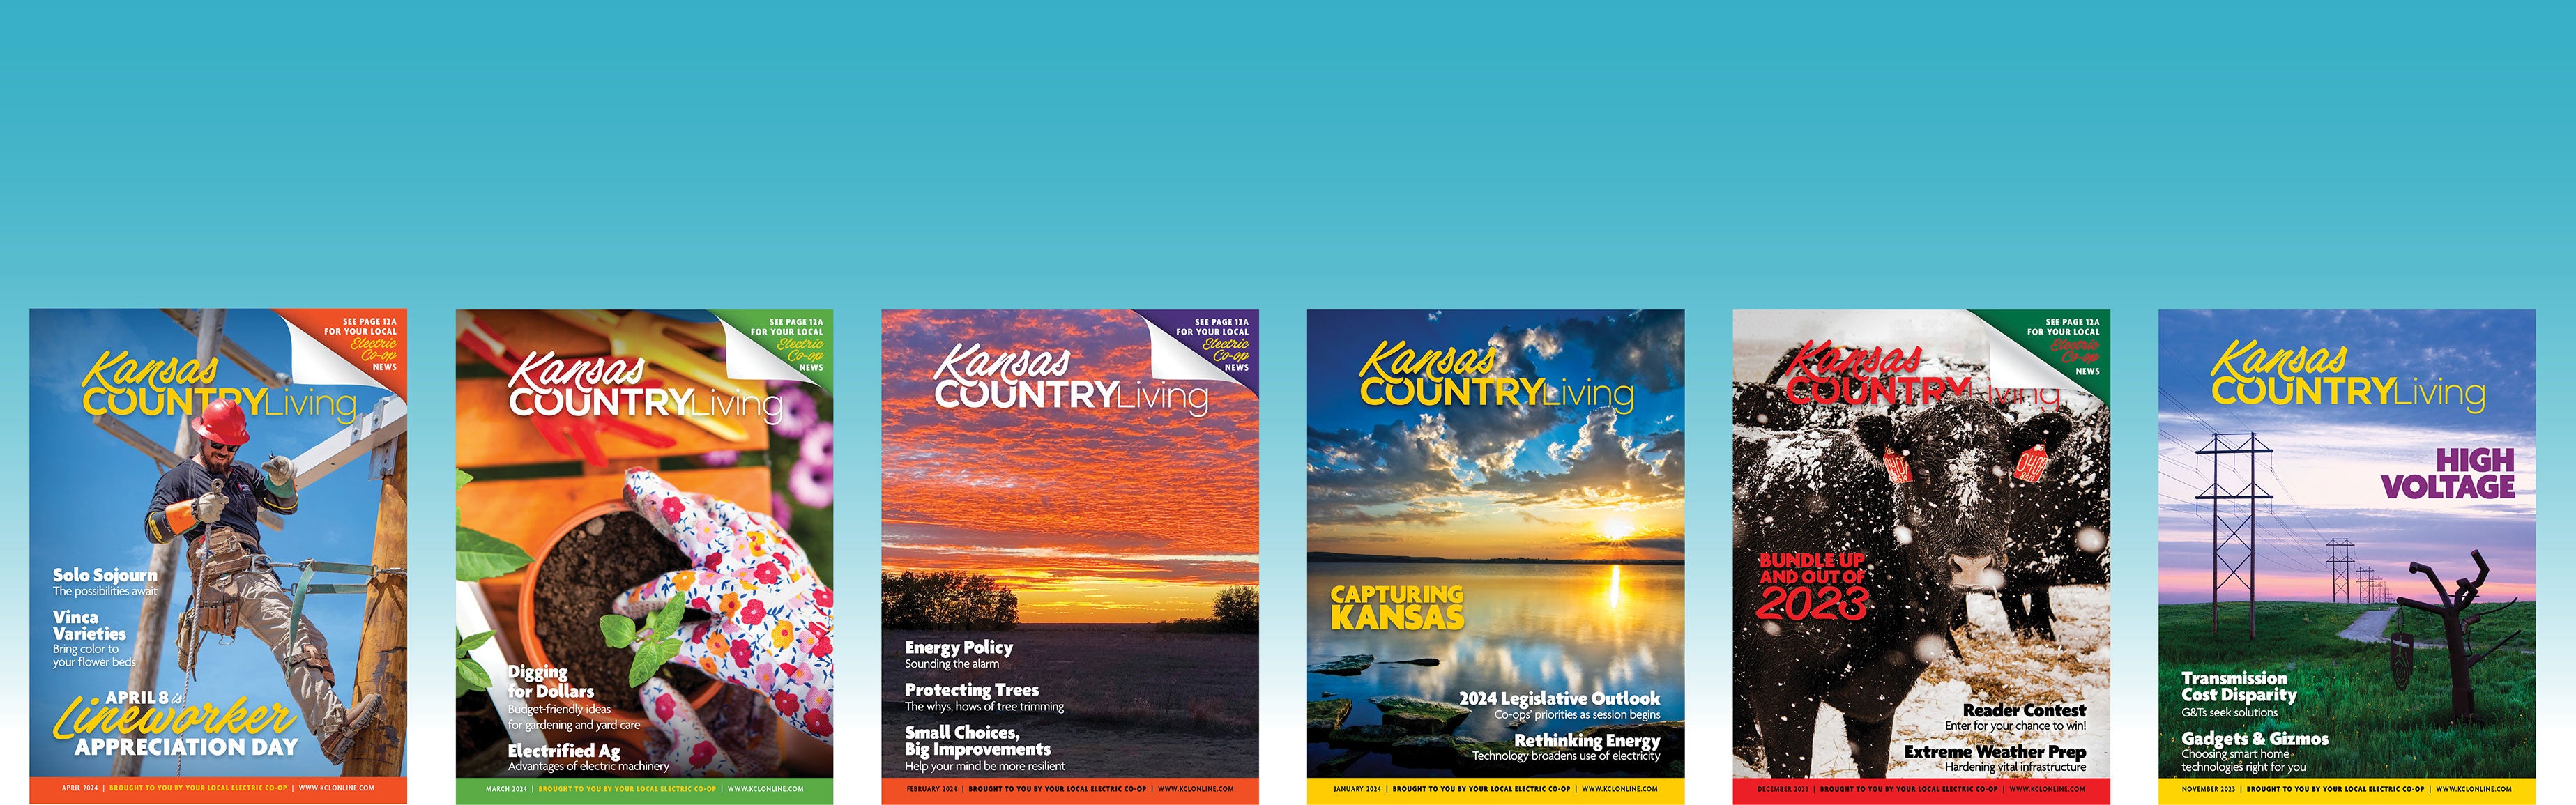 KCL Covers